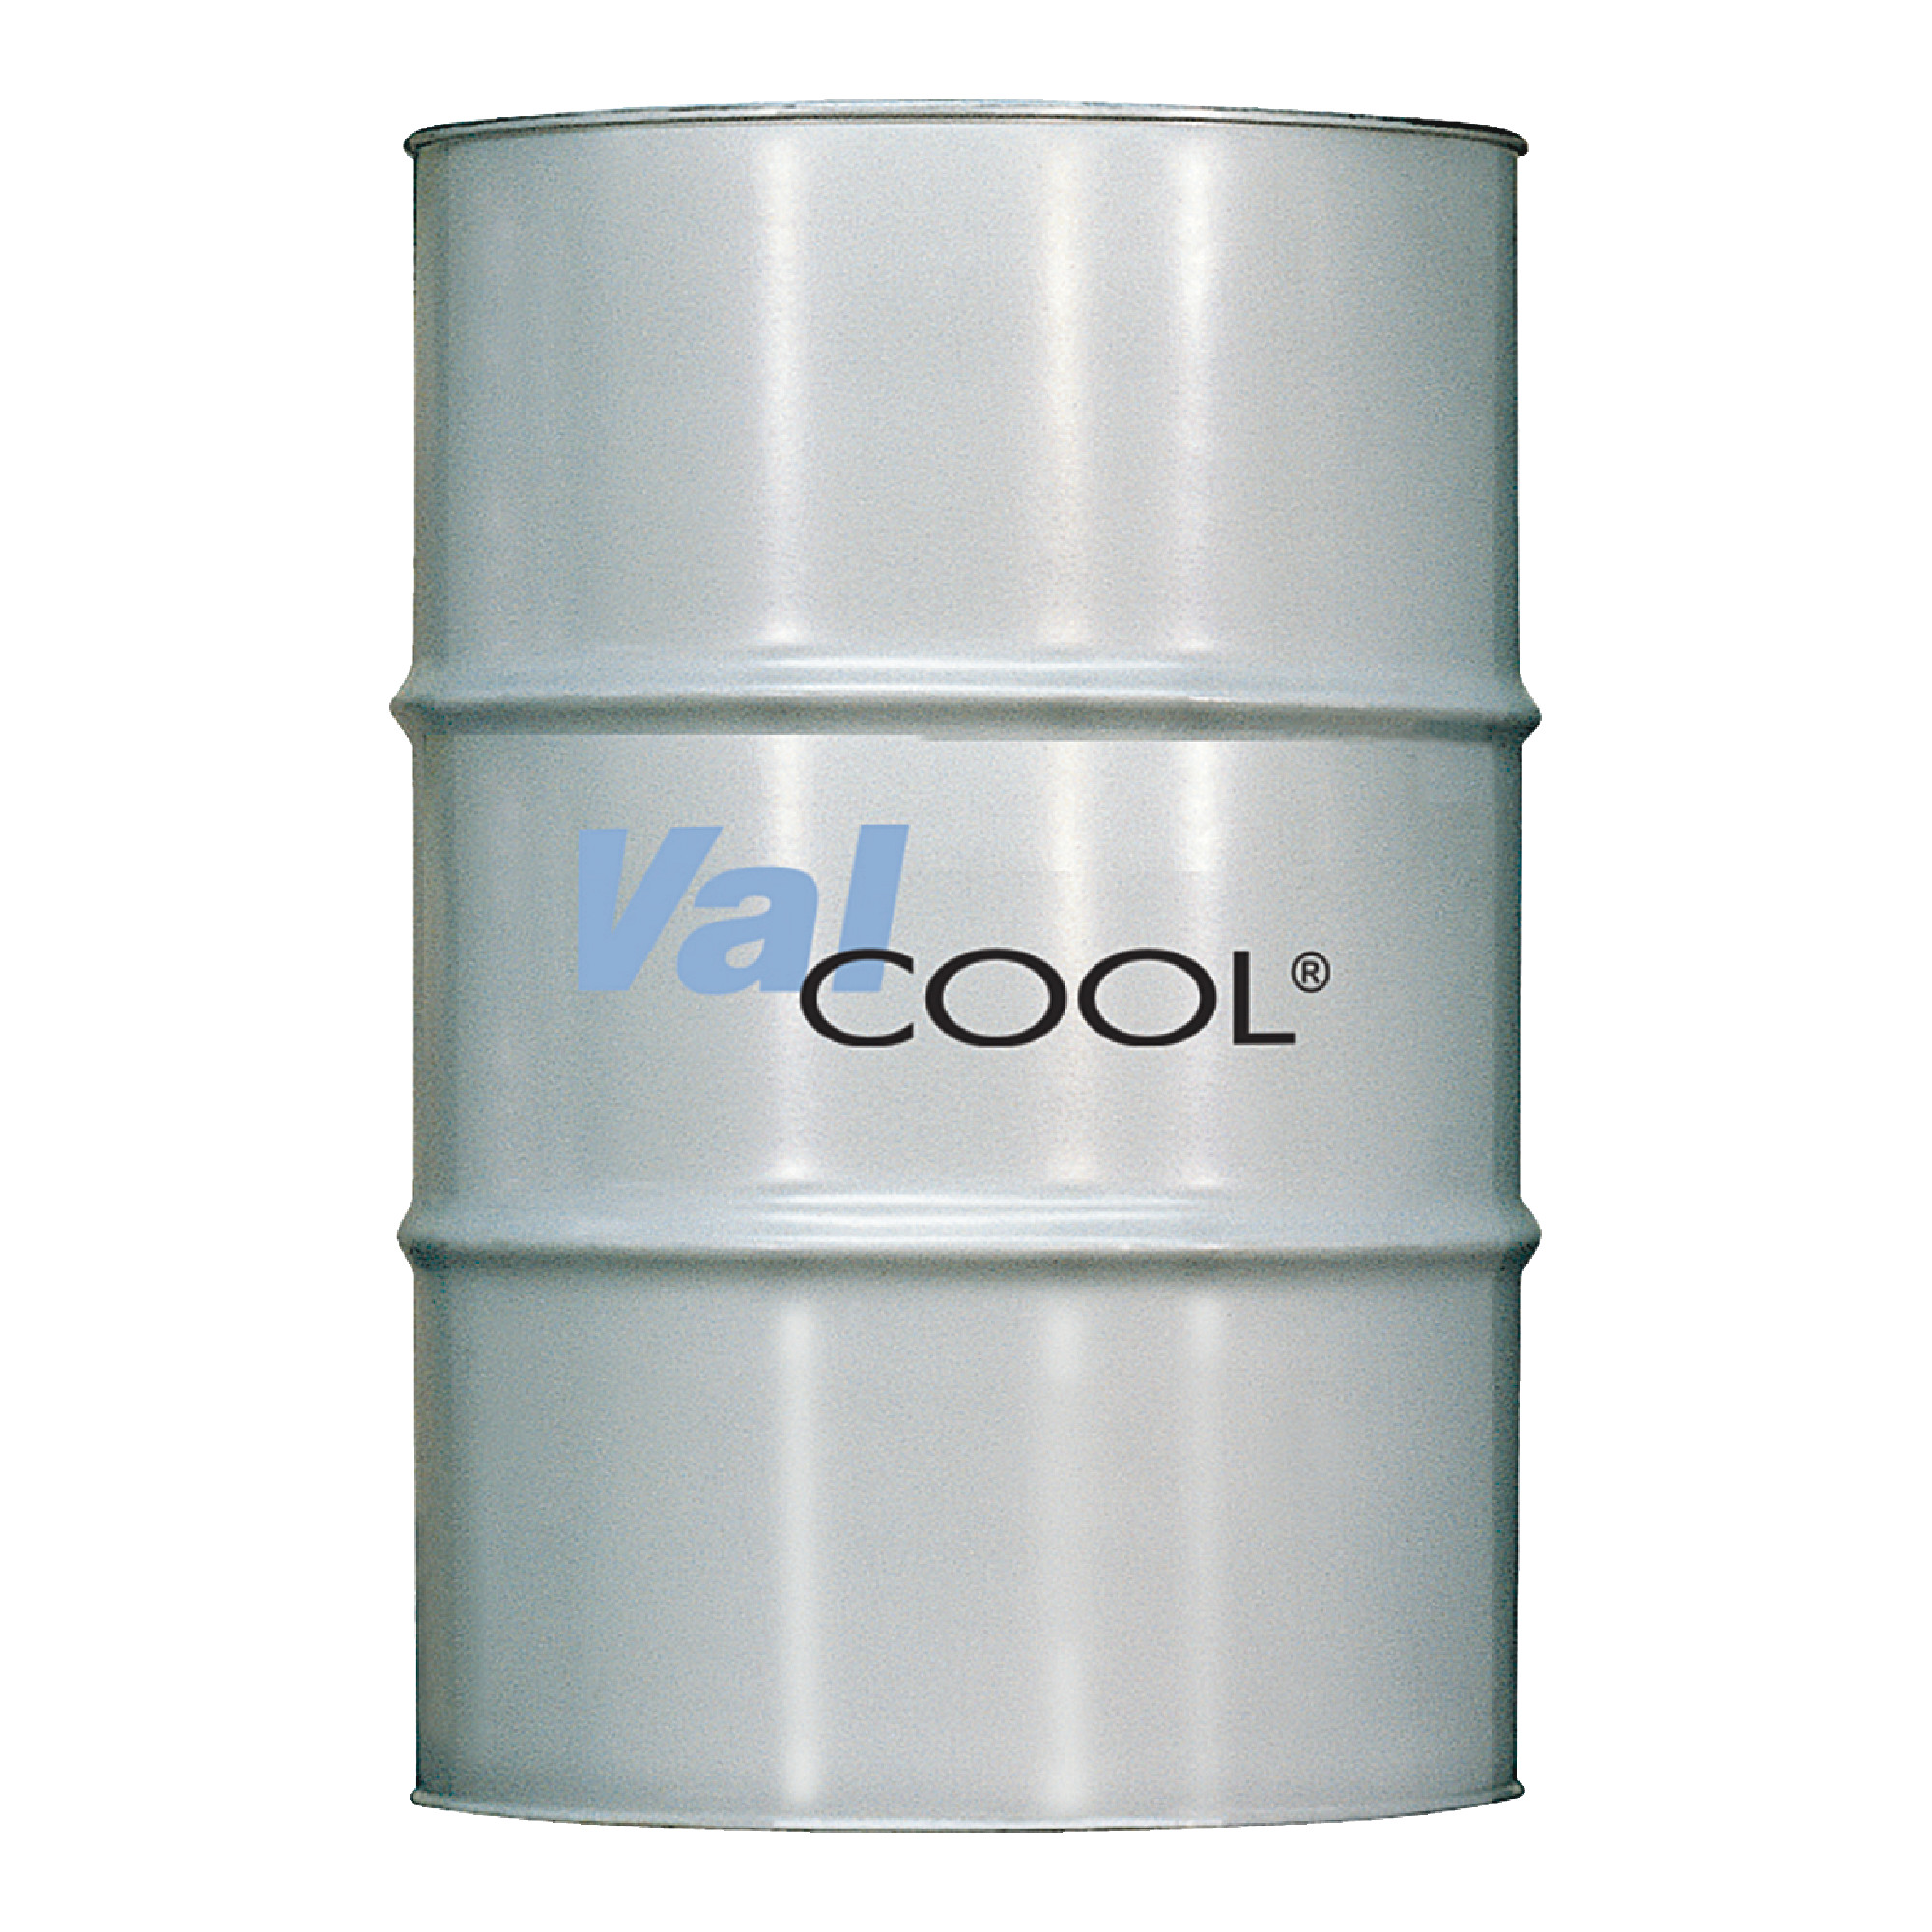 VALCOOL Val-Lube AW 46 AW Hydraulic Oil